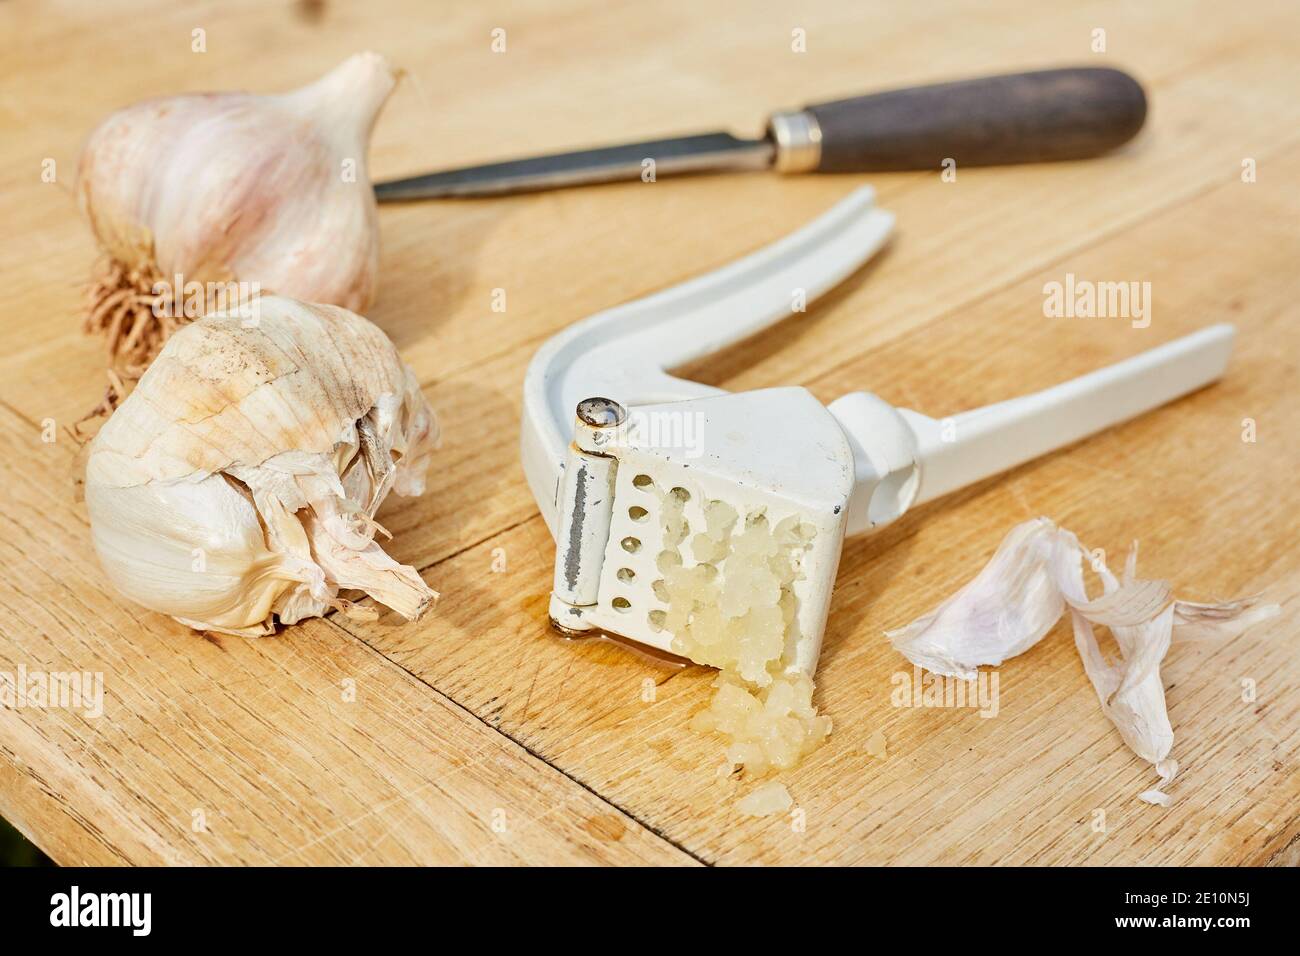 Garlic Bulbs, Knife, and Press on Cutting Board with Freshly Pressed Garlic, Horizontal View 1 Stock Photo